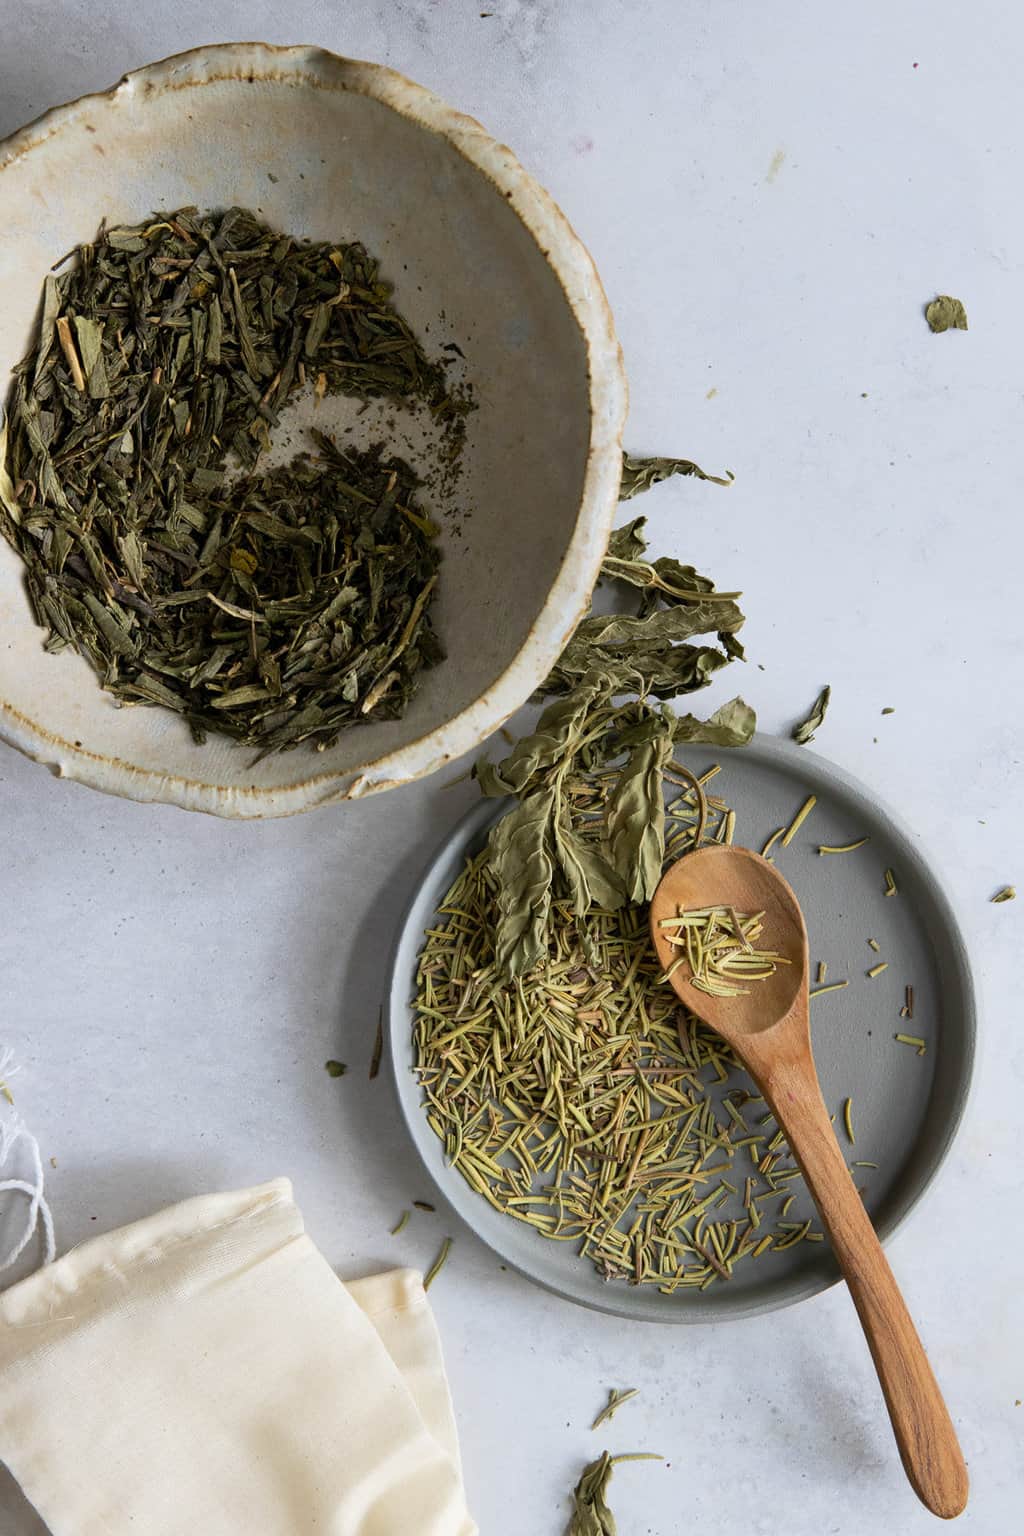 Motivating Tea Blend with peppermint, rosemary and green tea